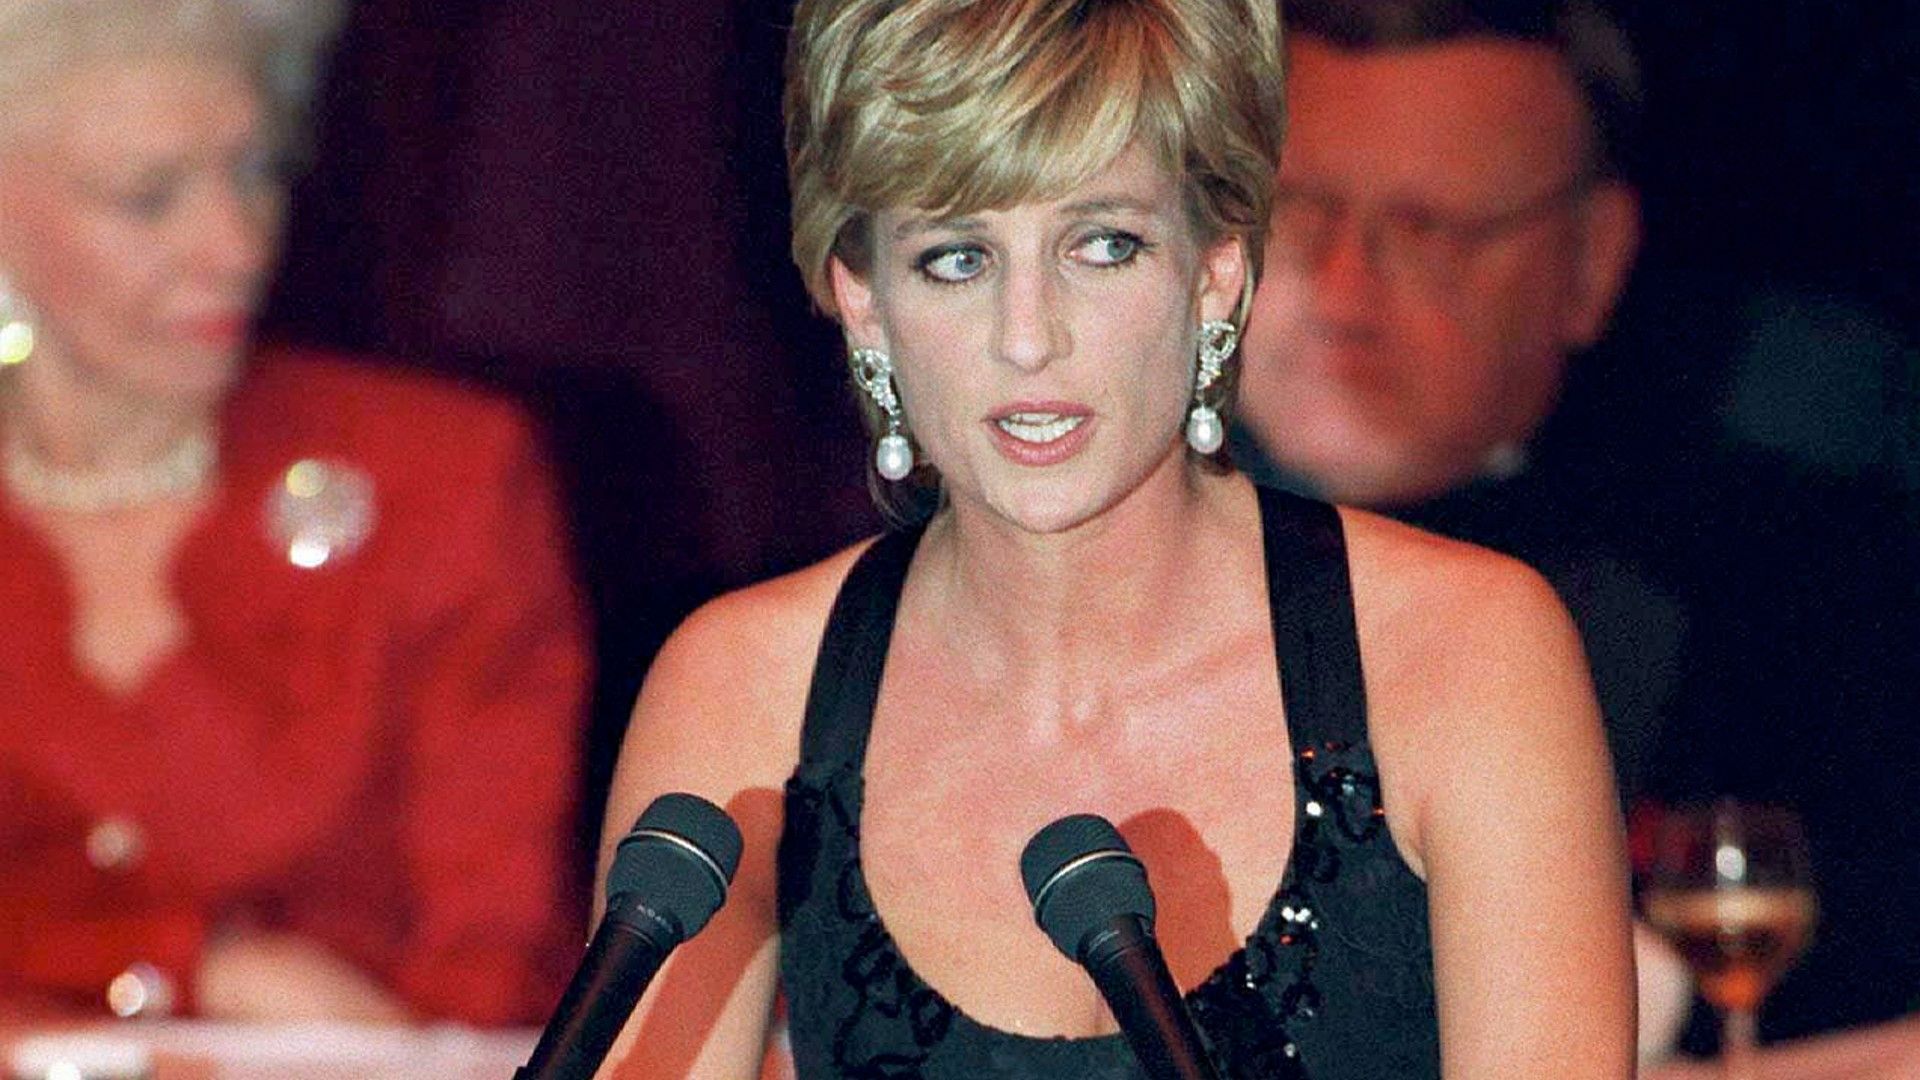 <p>                     Shortly after her famous <em>Panorama</em> interview with Martin Bashir in 1995, Diana took it upon herself to hire a voice coach, Stewart Pearce, to help her present a more confident image during her public duties.                   </p>                                      <p>                     The pair worked together until her death in 1997, and Stewart had rarely spoken about their relationship, until 2021, when he wrote a book called<em> Diana: The Voice of Change</em>, sharing details about his time with the Princess.                   </p>                                      <p>                     Speaking to<em> Town & Country</em> about Diana’s aims, he said, "She sought me out after that <em>Panorama</em> interview because she looked at herself on-screen and realised that she wasn't appearing to be as powerful as she wanted to be. She felt quite submissive.                   </p>                                      <p>                     "She wanted to try and find a way of really balancing her private self with her public persona so that there is no change between the two – so she could stand on a platform and render forth whatever she needed to say, but feel good about it, to feel relaxed, to feel confident, to feel empowered, and to feel harmony," he said.                   </p>